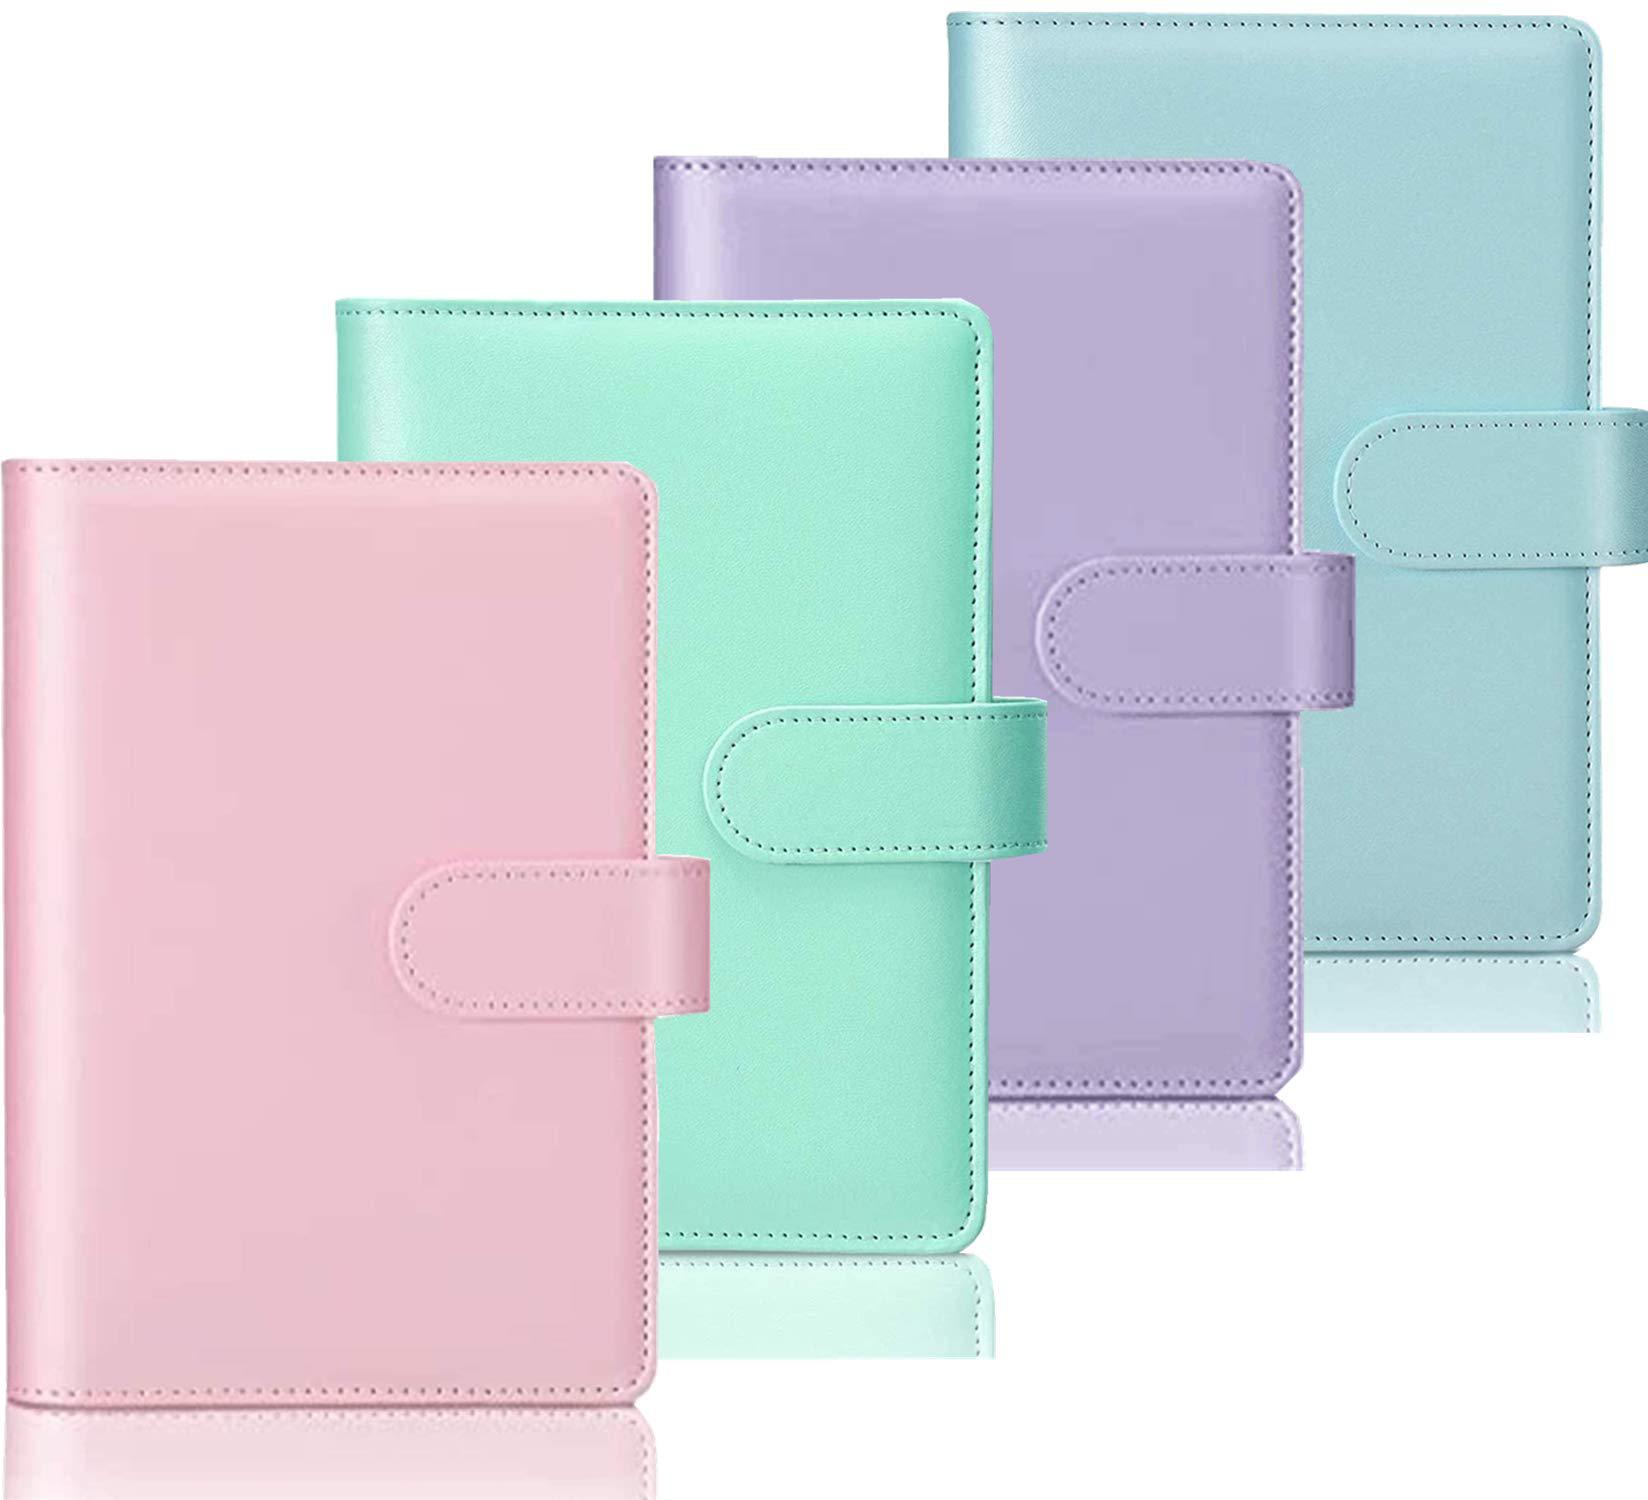 MYUOOT a6 pu leather notebook binder, refillable a6 inner filler papers personal diary schedule organizer planner journal binder cov